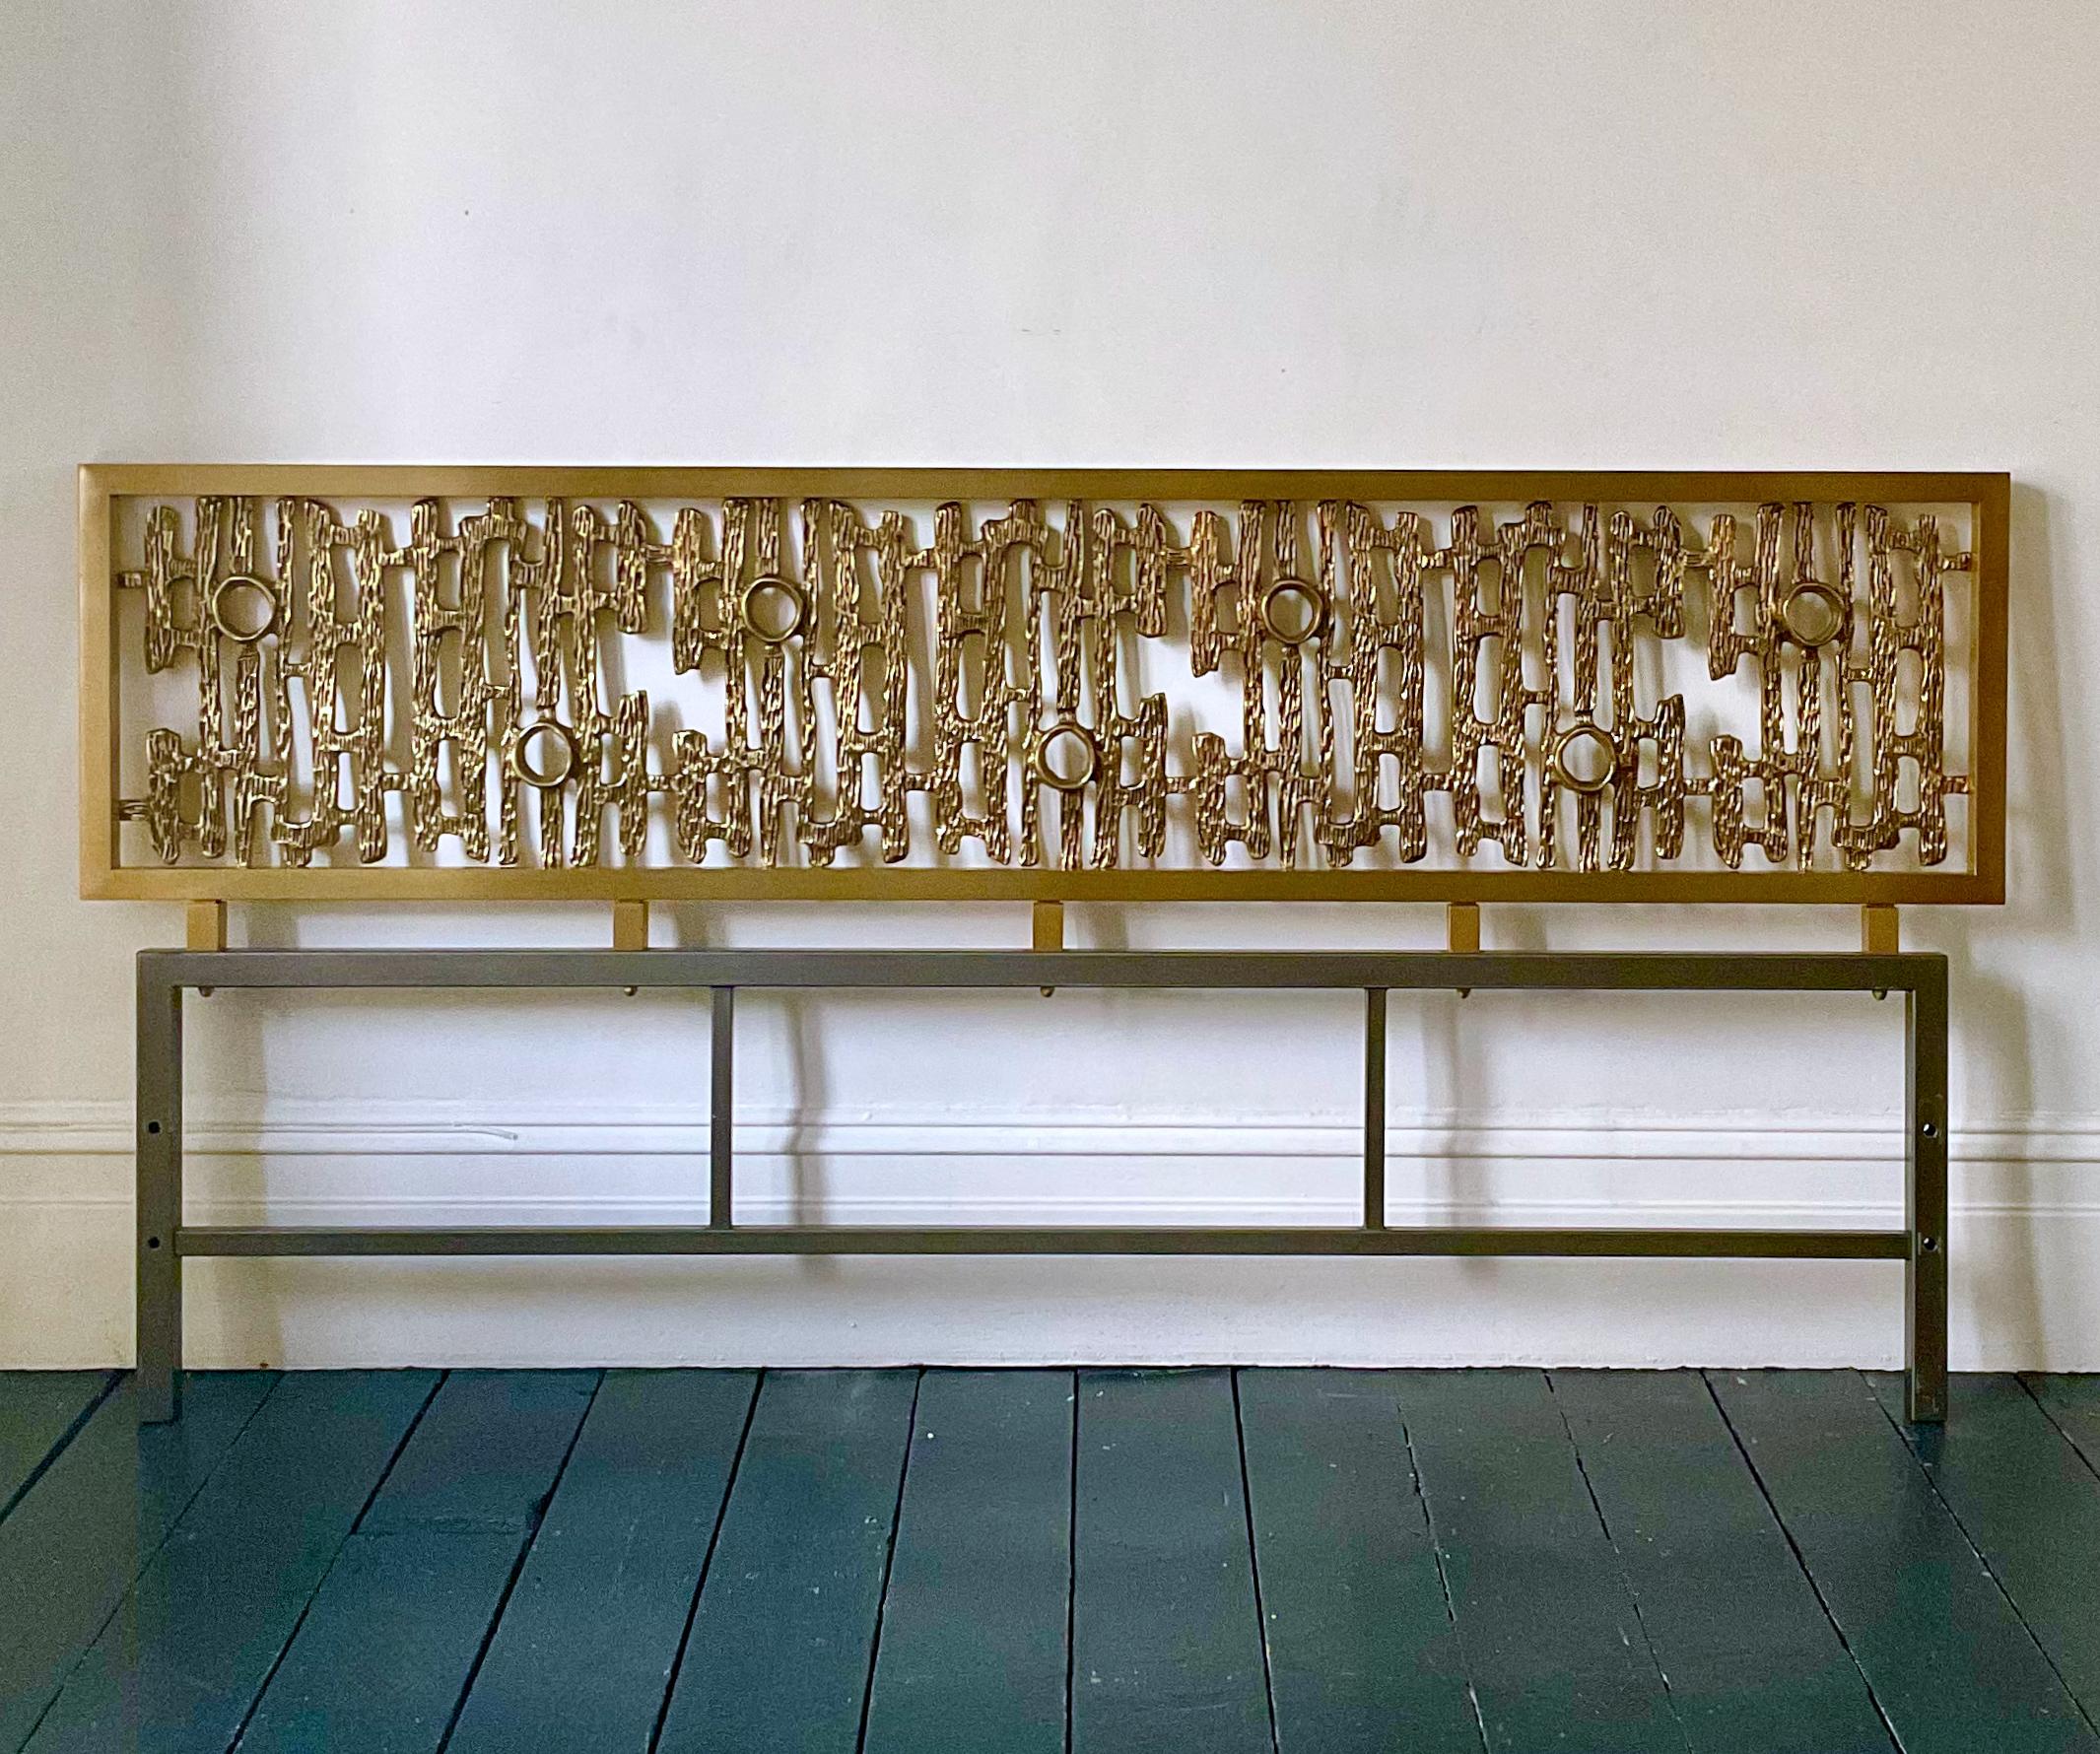 An elegant mid-20th century headboard with cast bronze sculptural panel, designed by Luciano Frigerio, Italy.

This is a stylish piece from the Cellini Arte collection - model Benny - 1970. The decorative section comprises a sculpture of cast